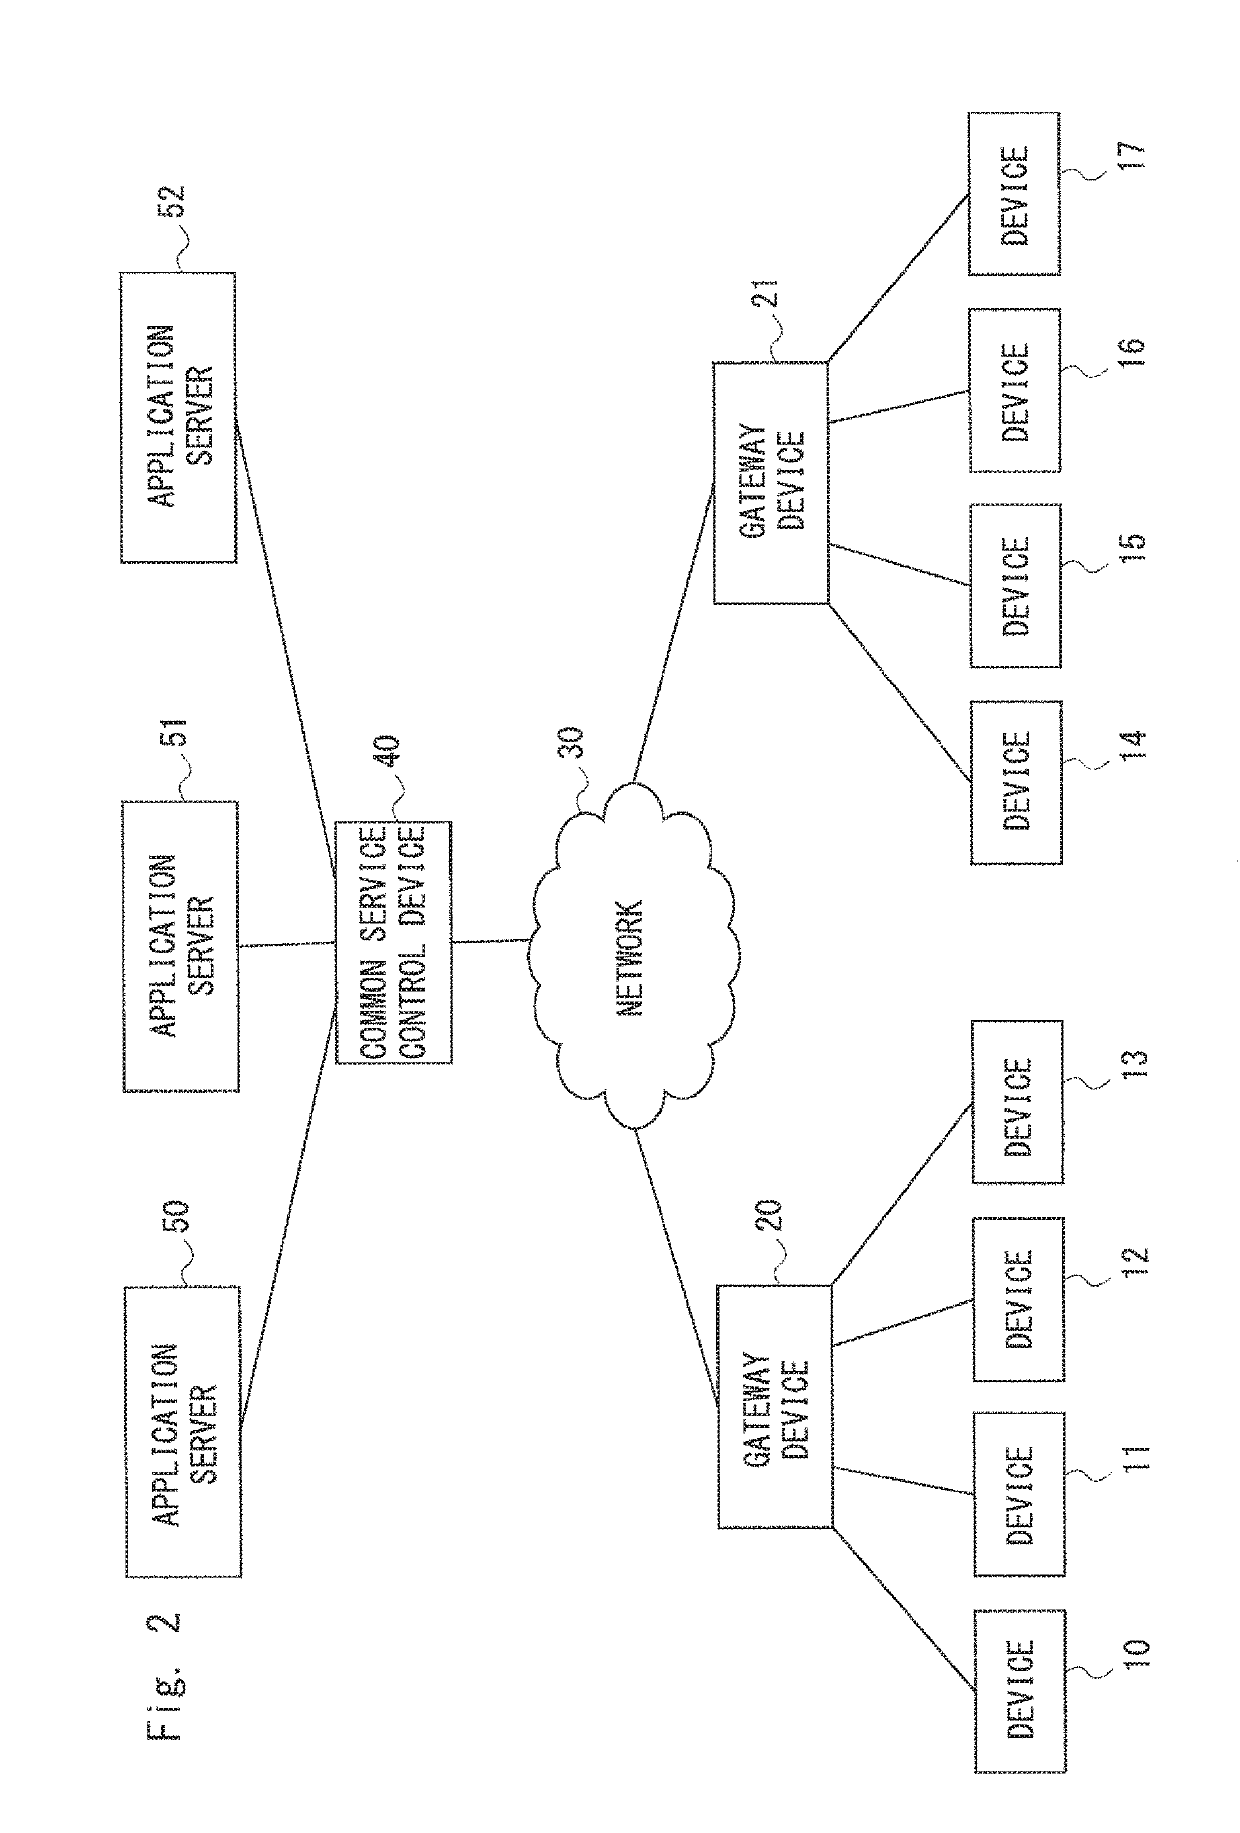 Communication aggregation system, control device, processing load control method and non-transitory computer readable medium storing program